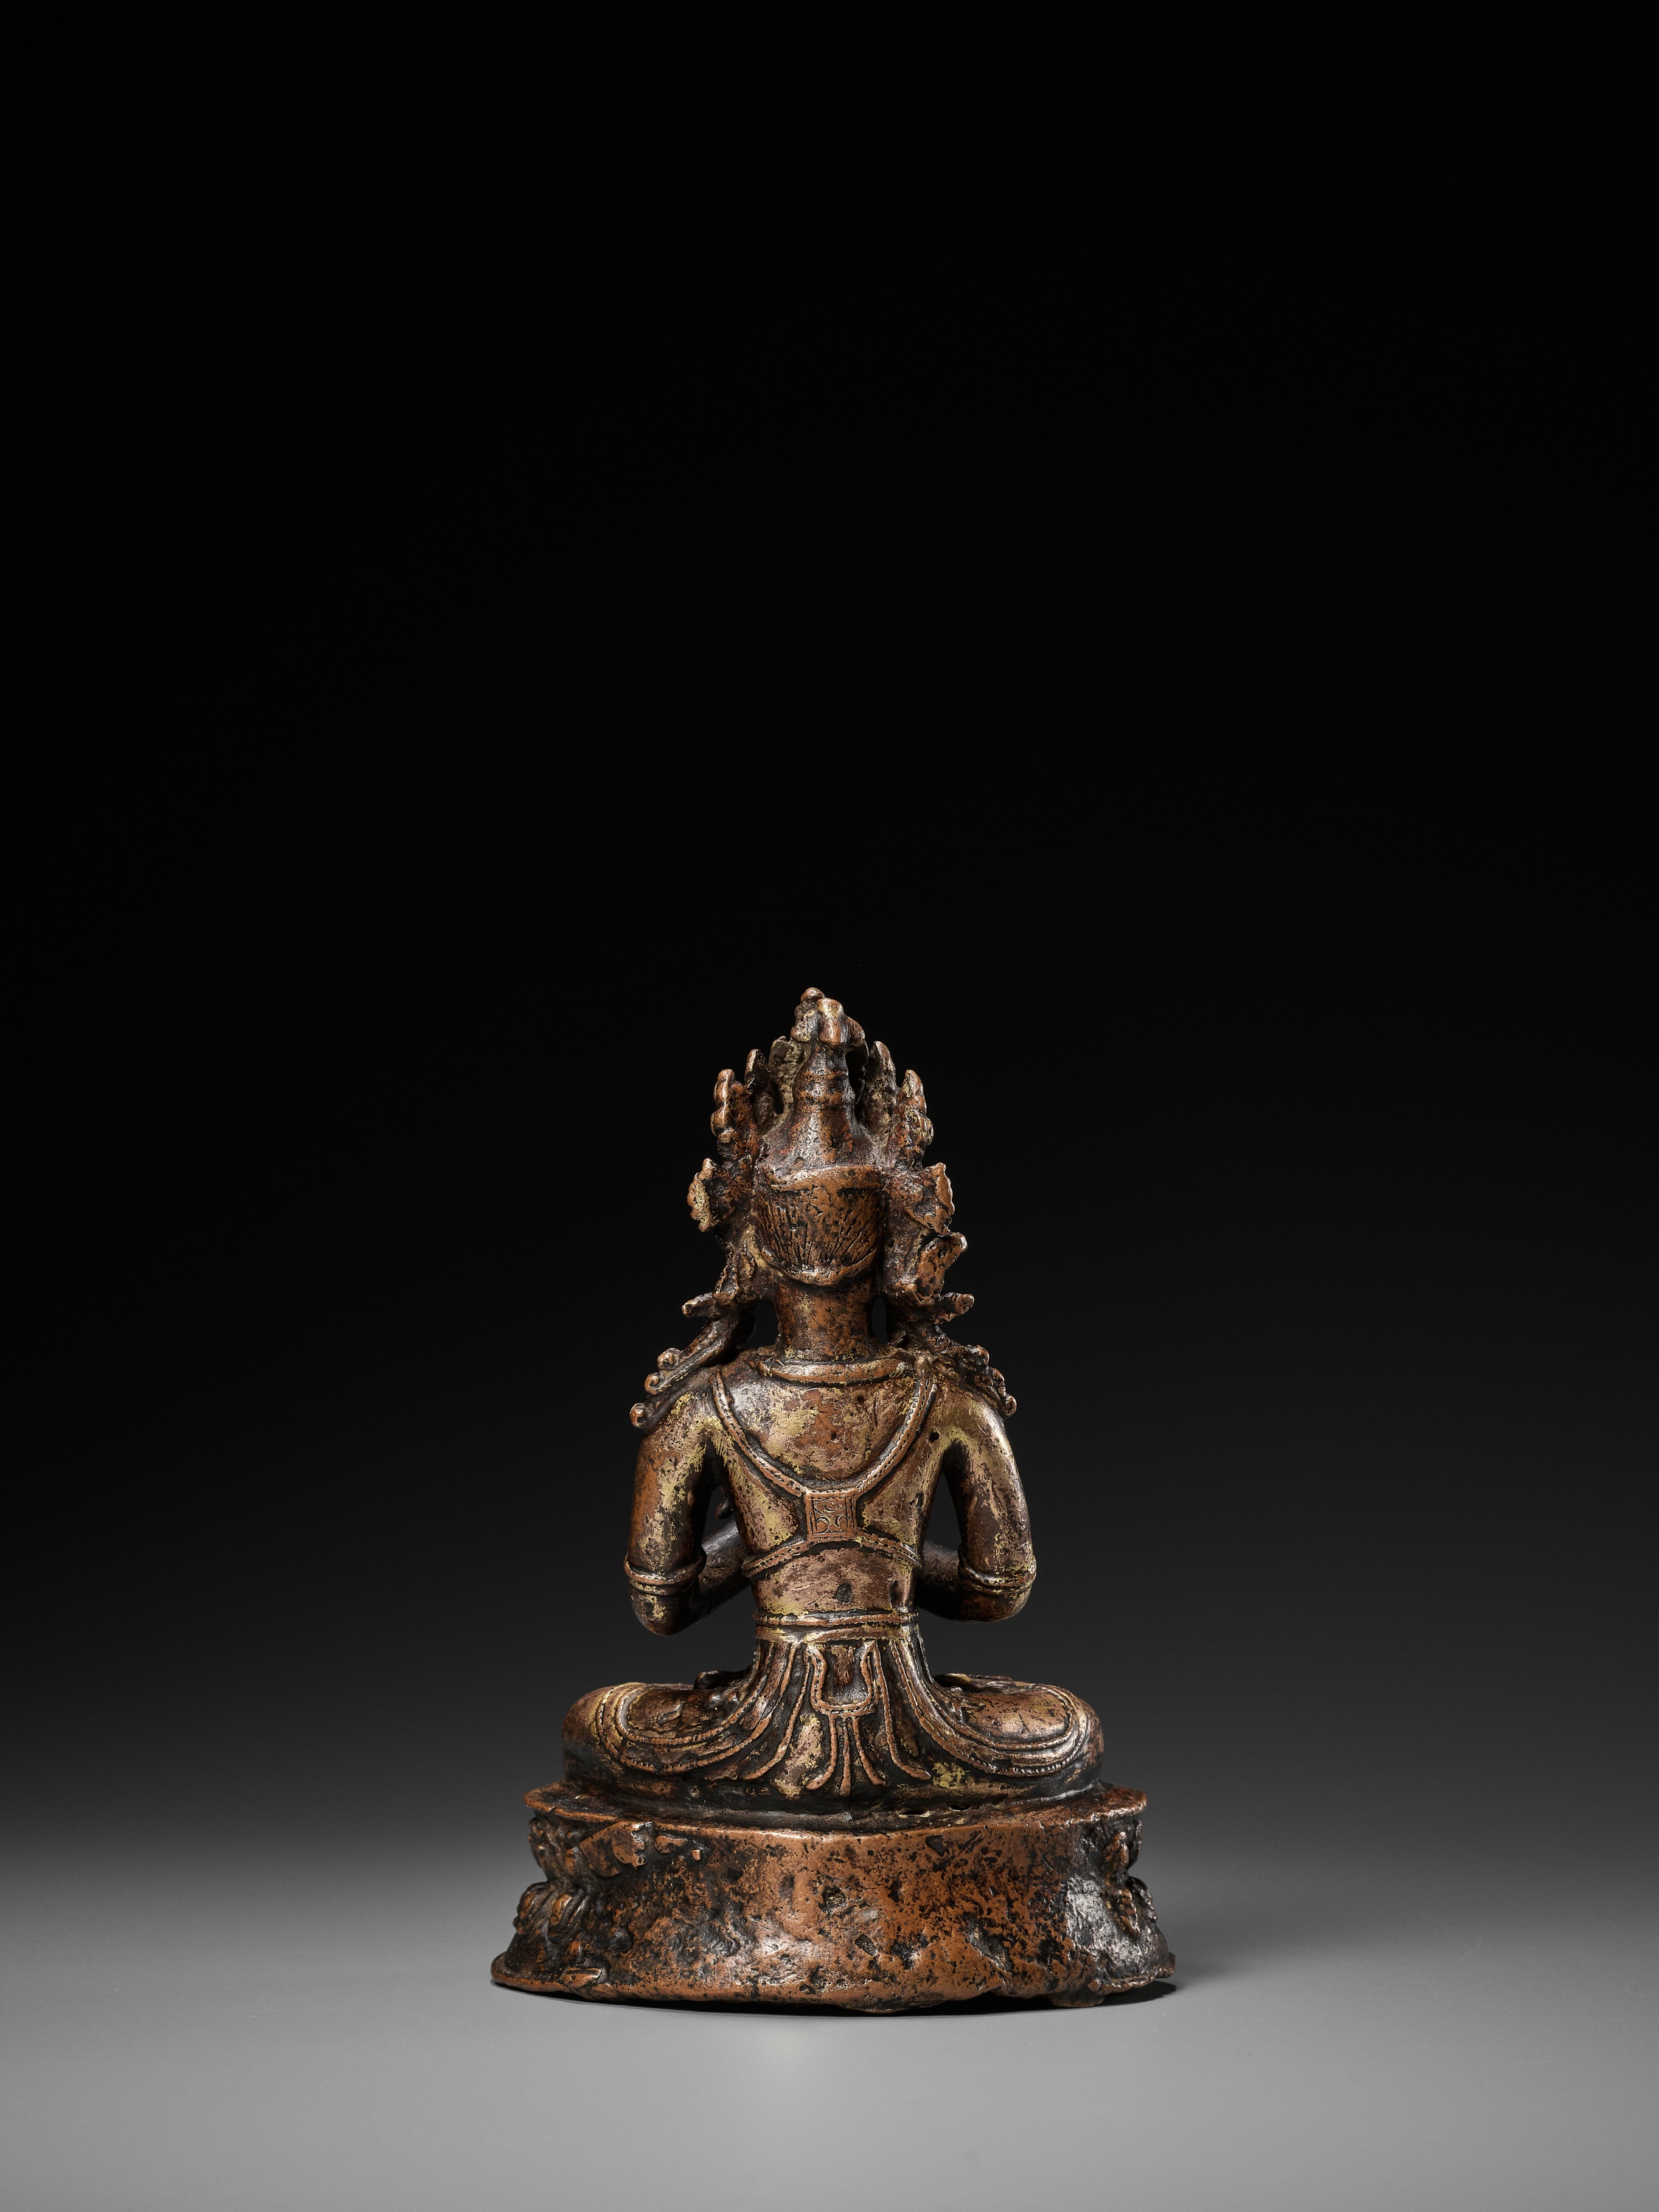 A GILT COPPER-ALLOY FIGURE OF VAJRADHARA, 15th-16TH CENTURY OR EARLIER - Image 8 of 13